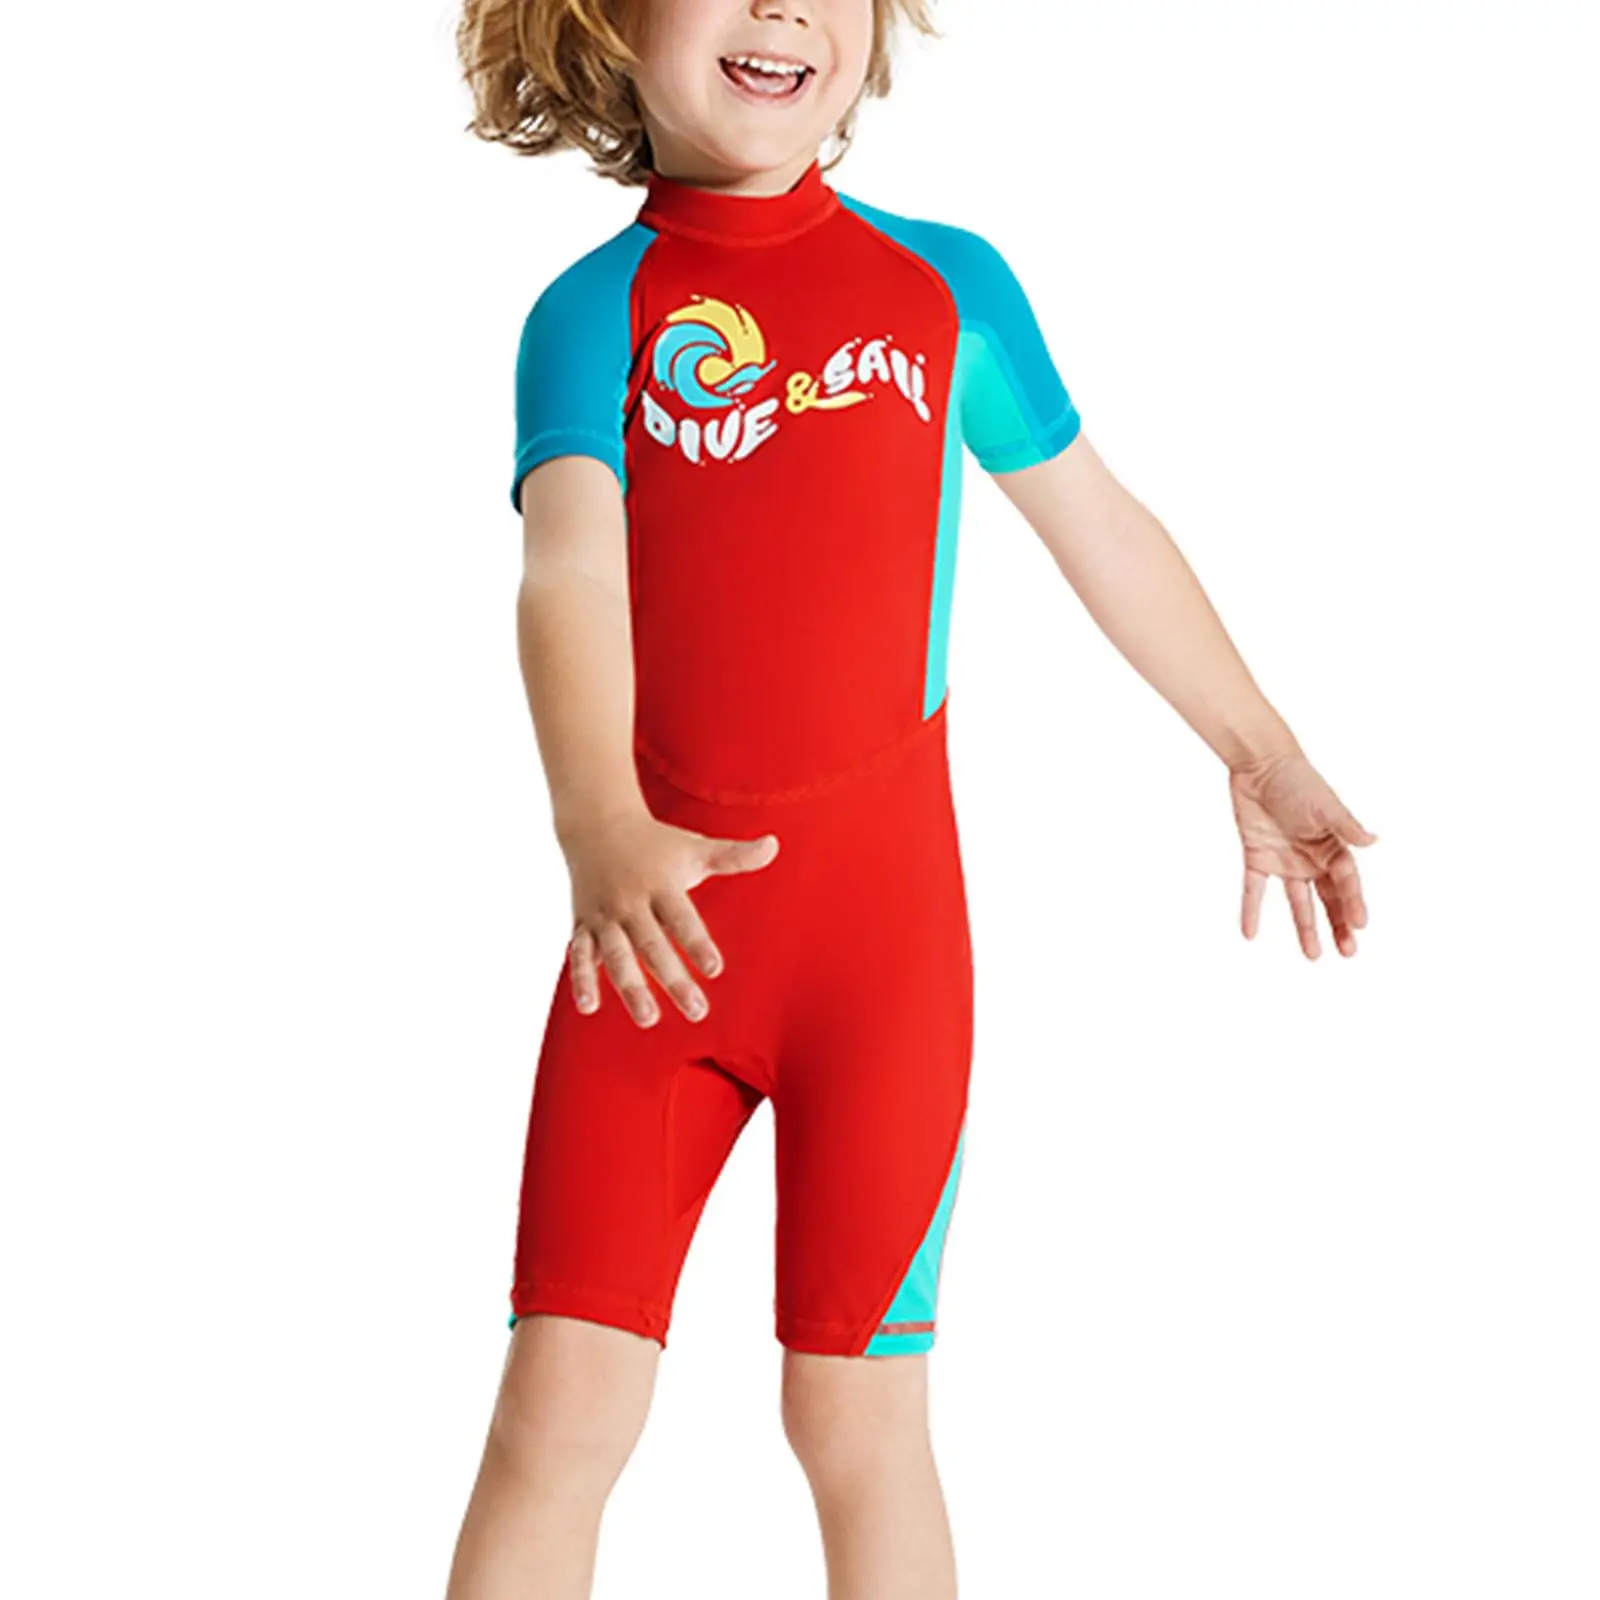 Kids Wetsuits Scuba Diving Suit Shorty Wetsuit for Diving Snorkeling Surfing XXL Red